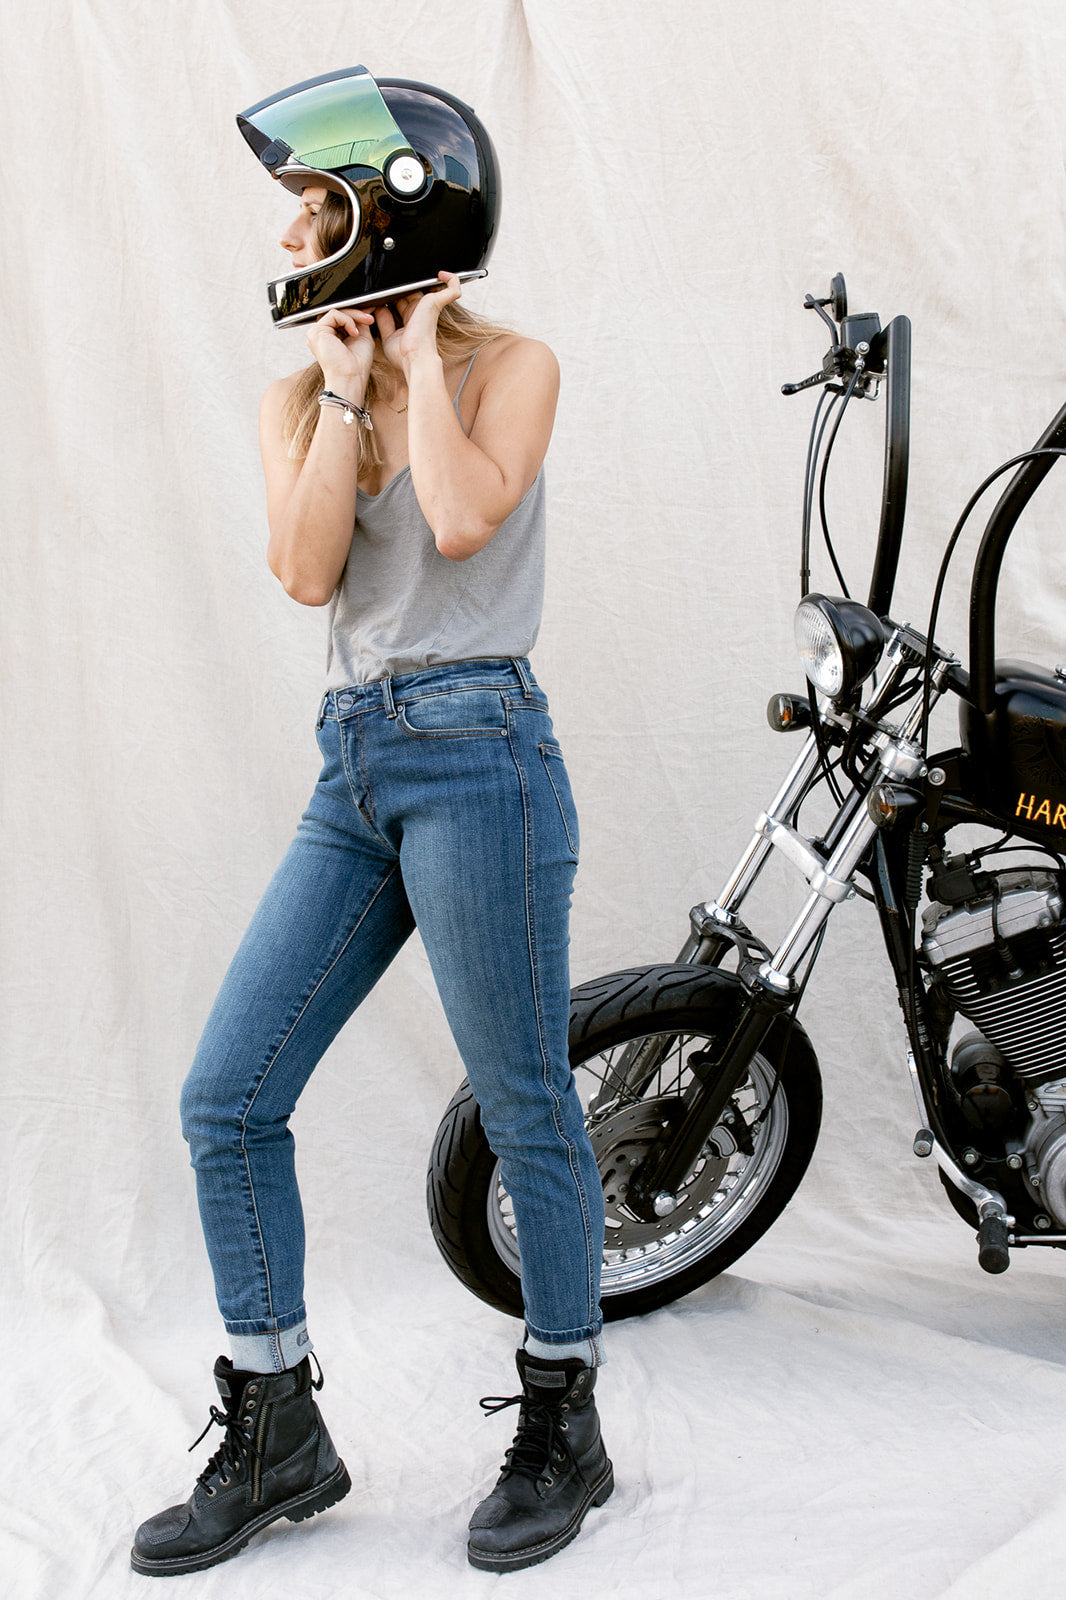 Marley Ladies SK Motorcycle Jeans  Skinny fit riding denim for fashionable  urban female riders.